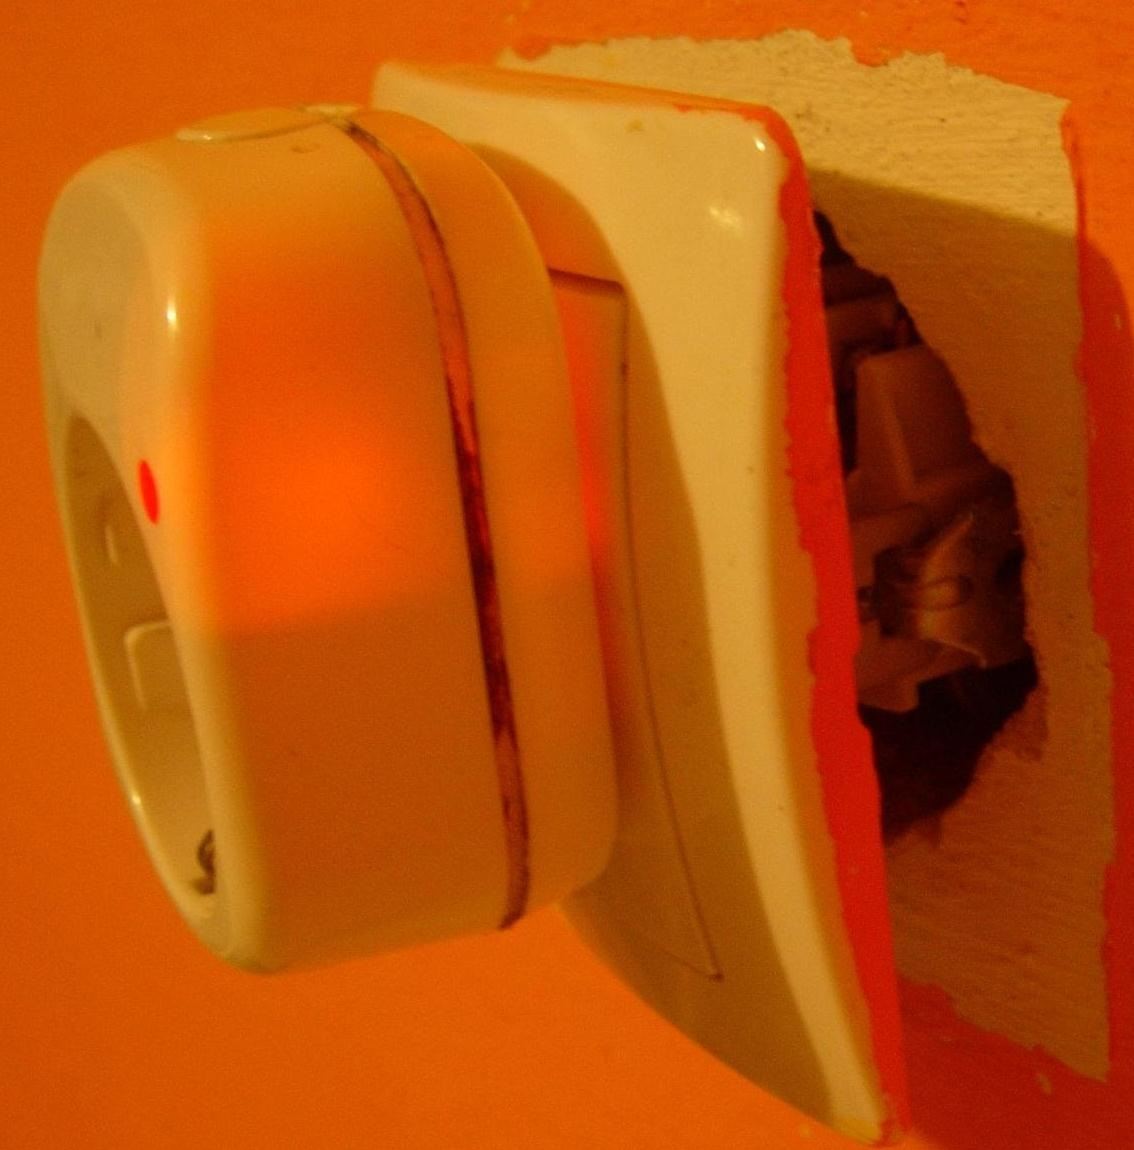 How to Place Your Electrical Socket Safely in the Wall If It Was Pulled Out